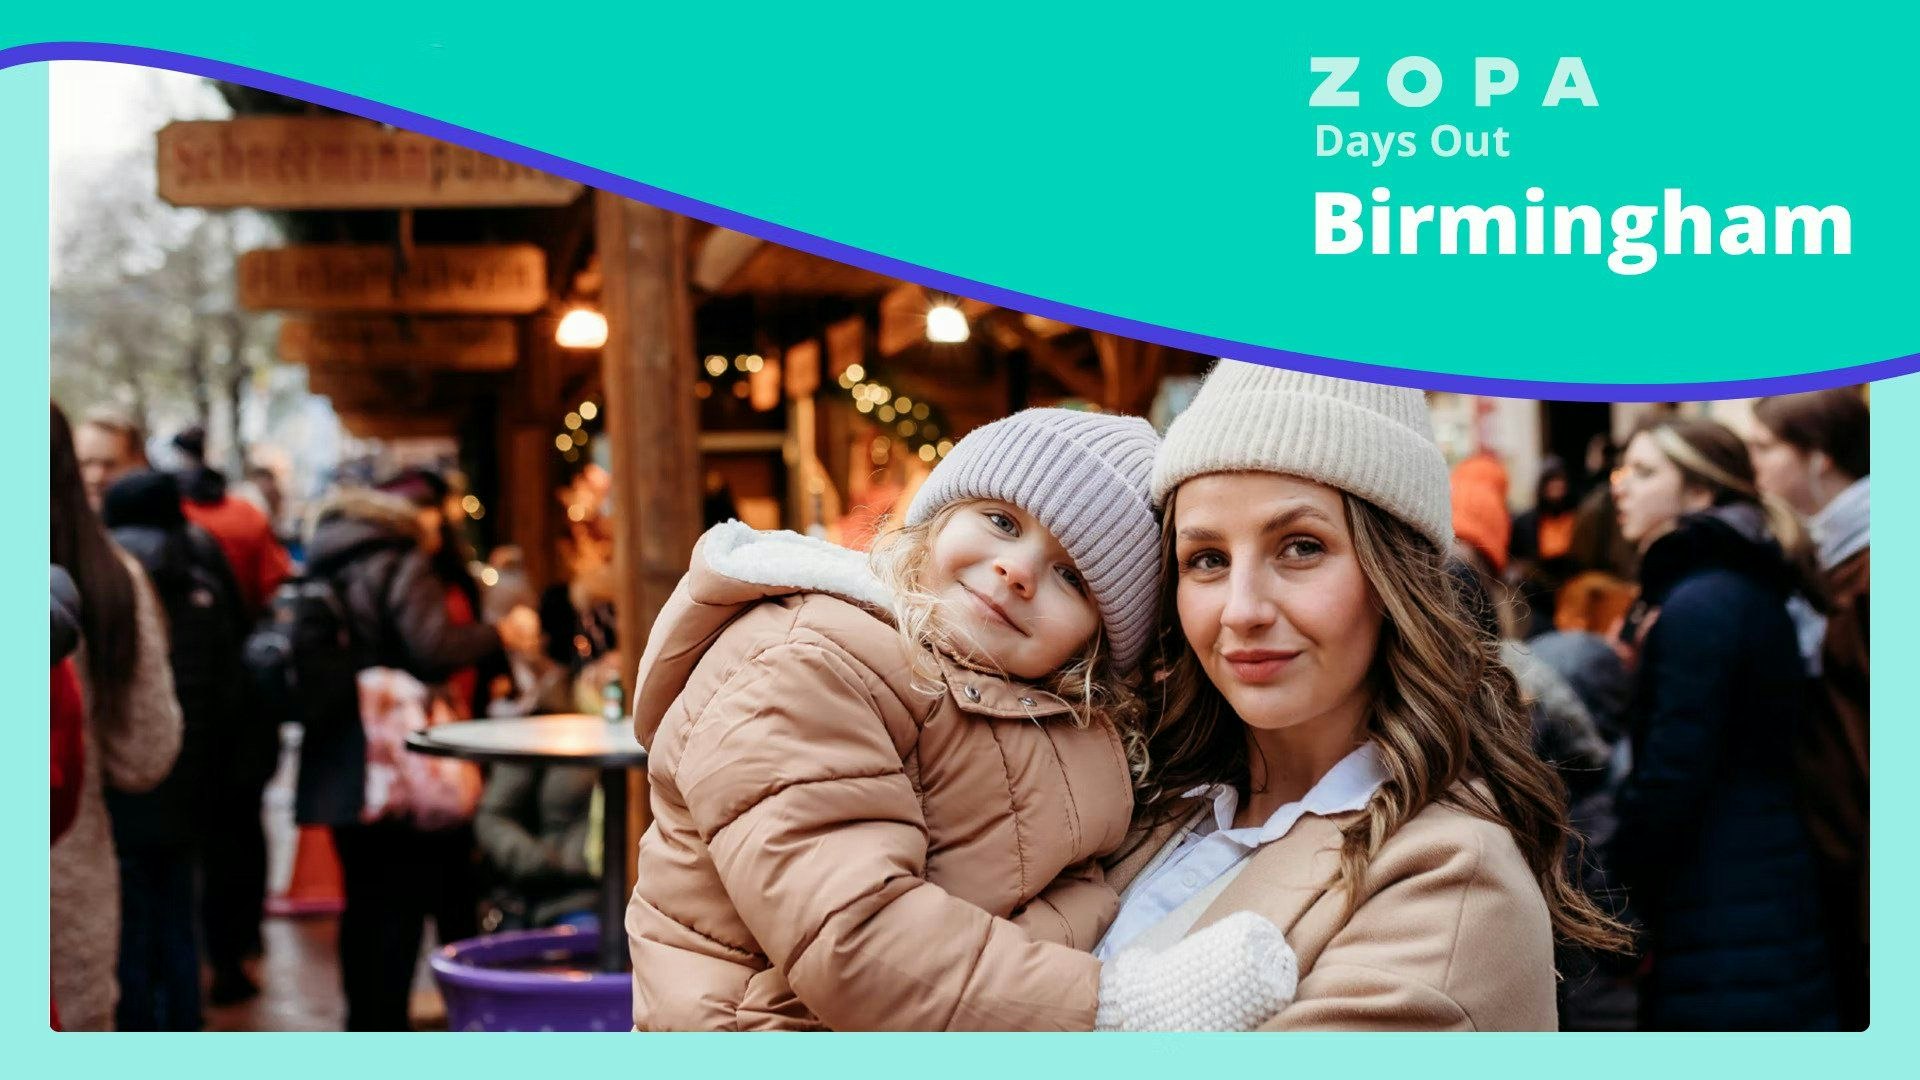 a-festive-family-day-out-in-birmingham-and-what-it-costs